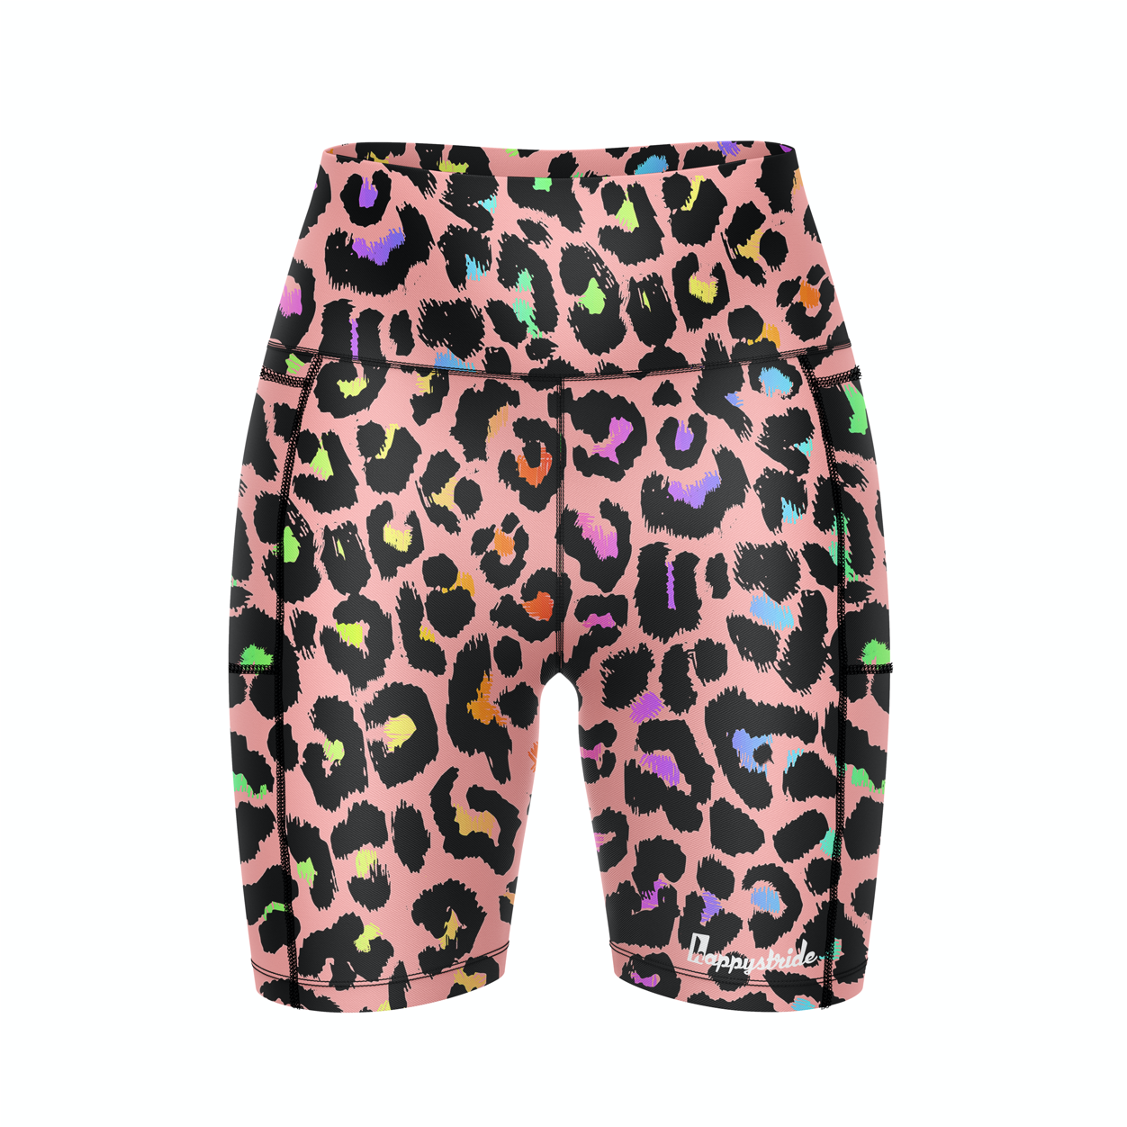 Get spotted'' saucy leopard print cool colourful fun bright running &  fitness shorts